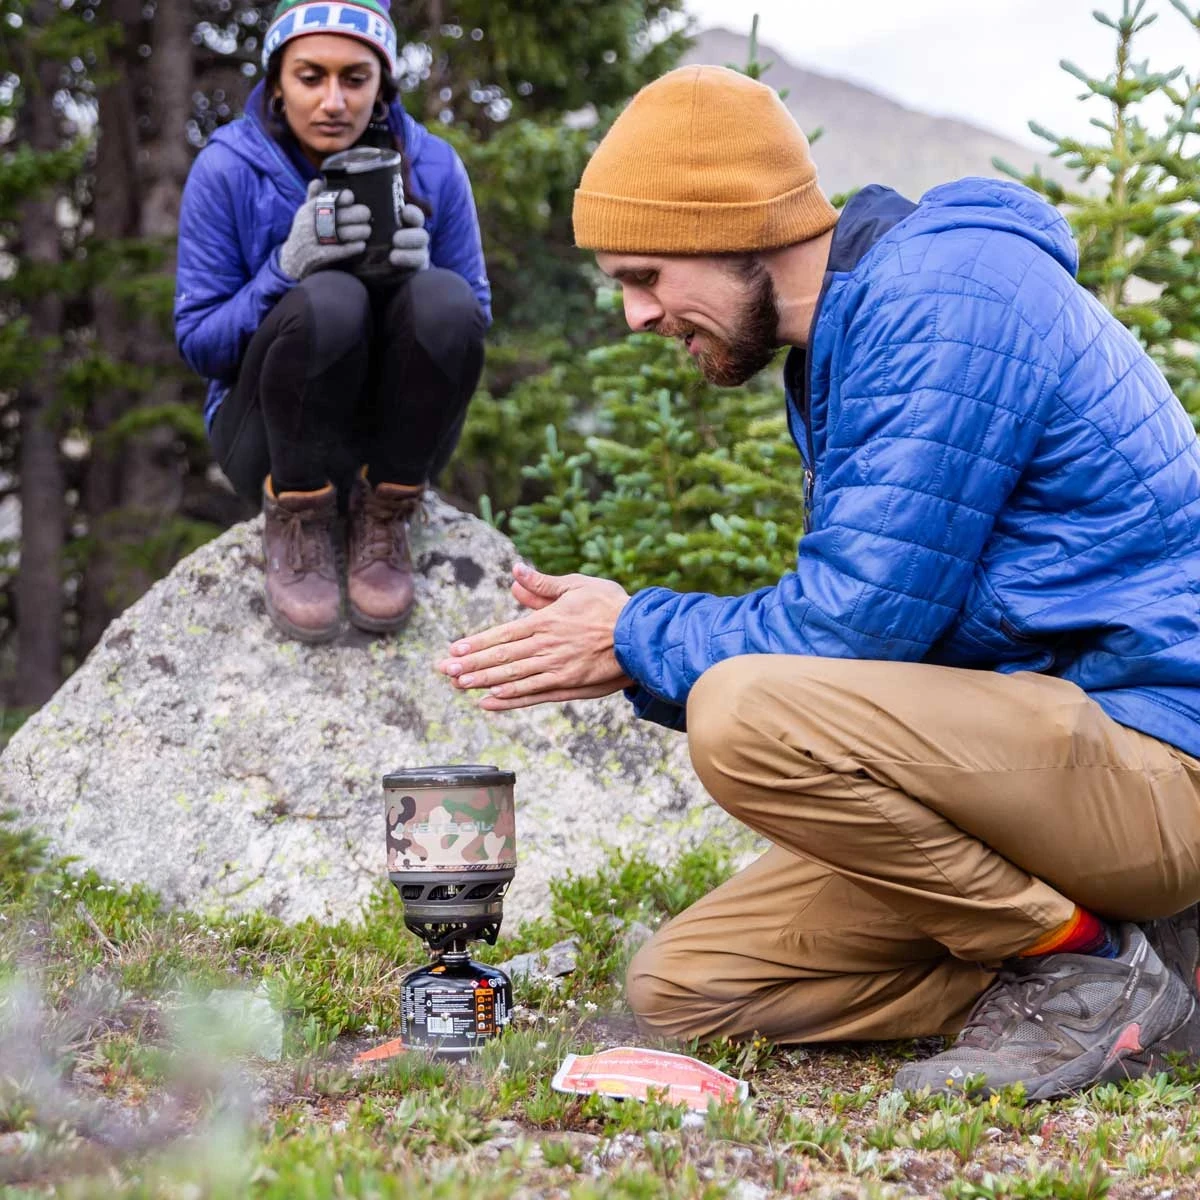 Couple using the MiniMo Cooking System outdoors